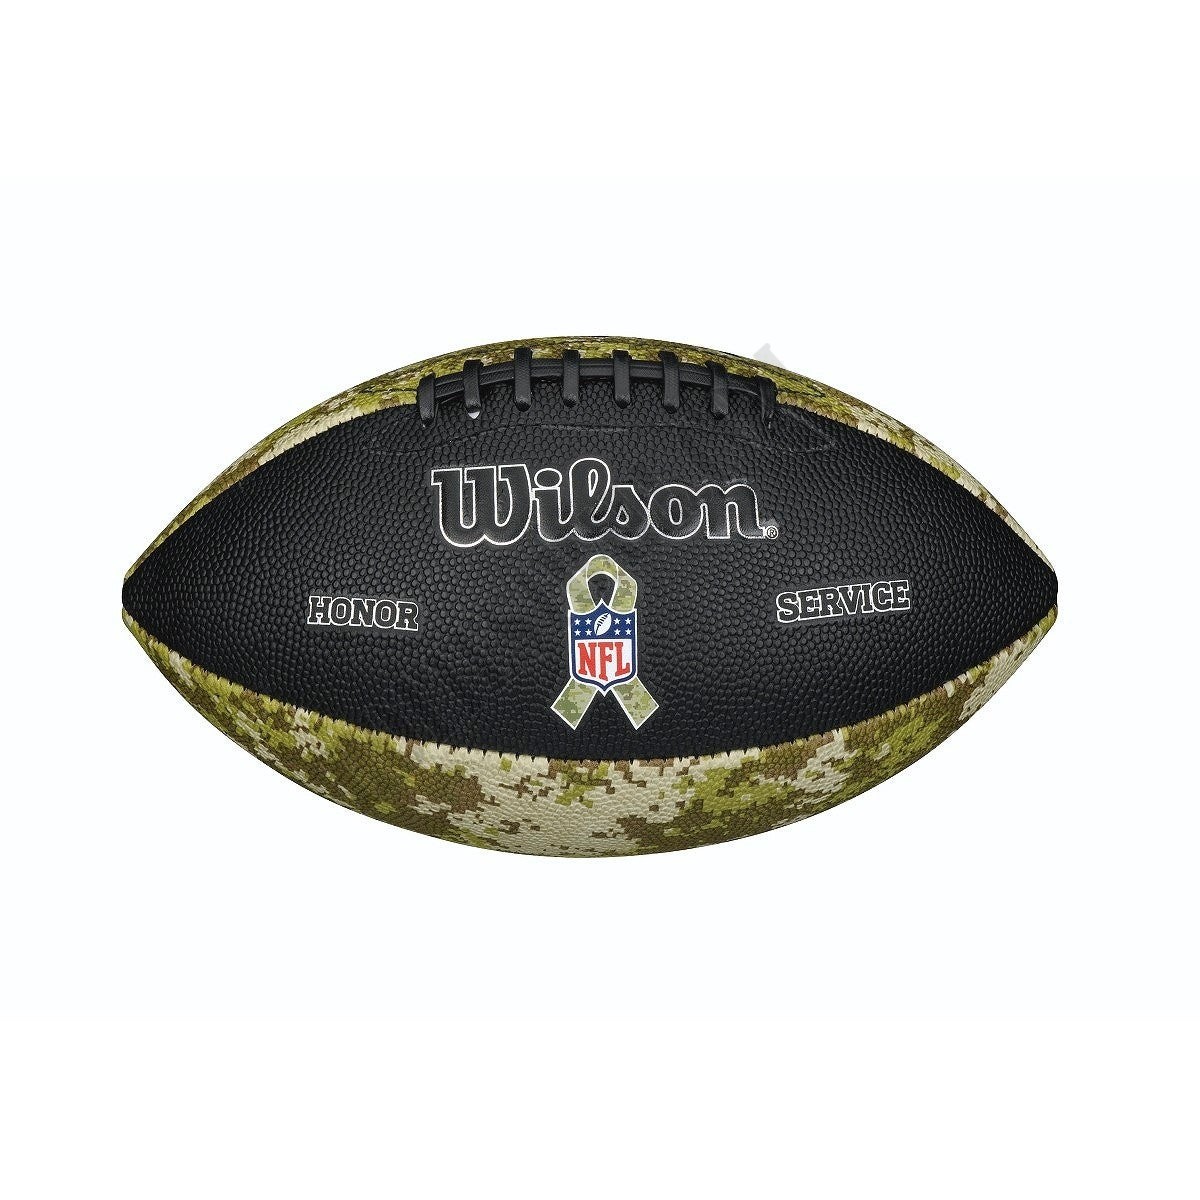 NFL SALUTE TO SERVICE HONOR FOOTBALL - JUNIOR - Wilson Discount Store - NFL SALUTE TO SERVICE HONOR FOOTBALL - JUNIOR - Wilson Discount Store